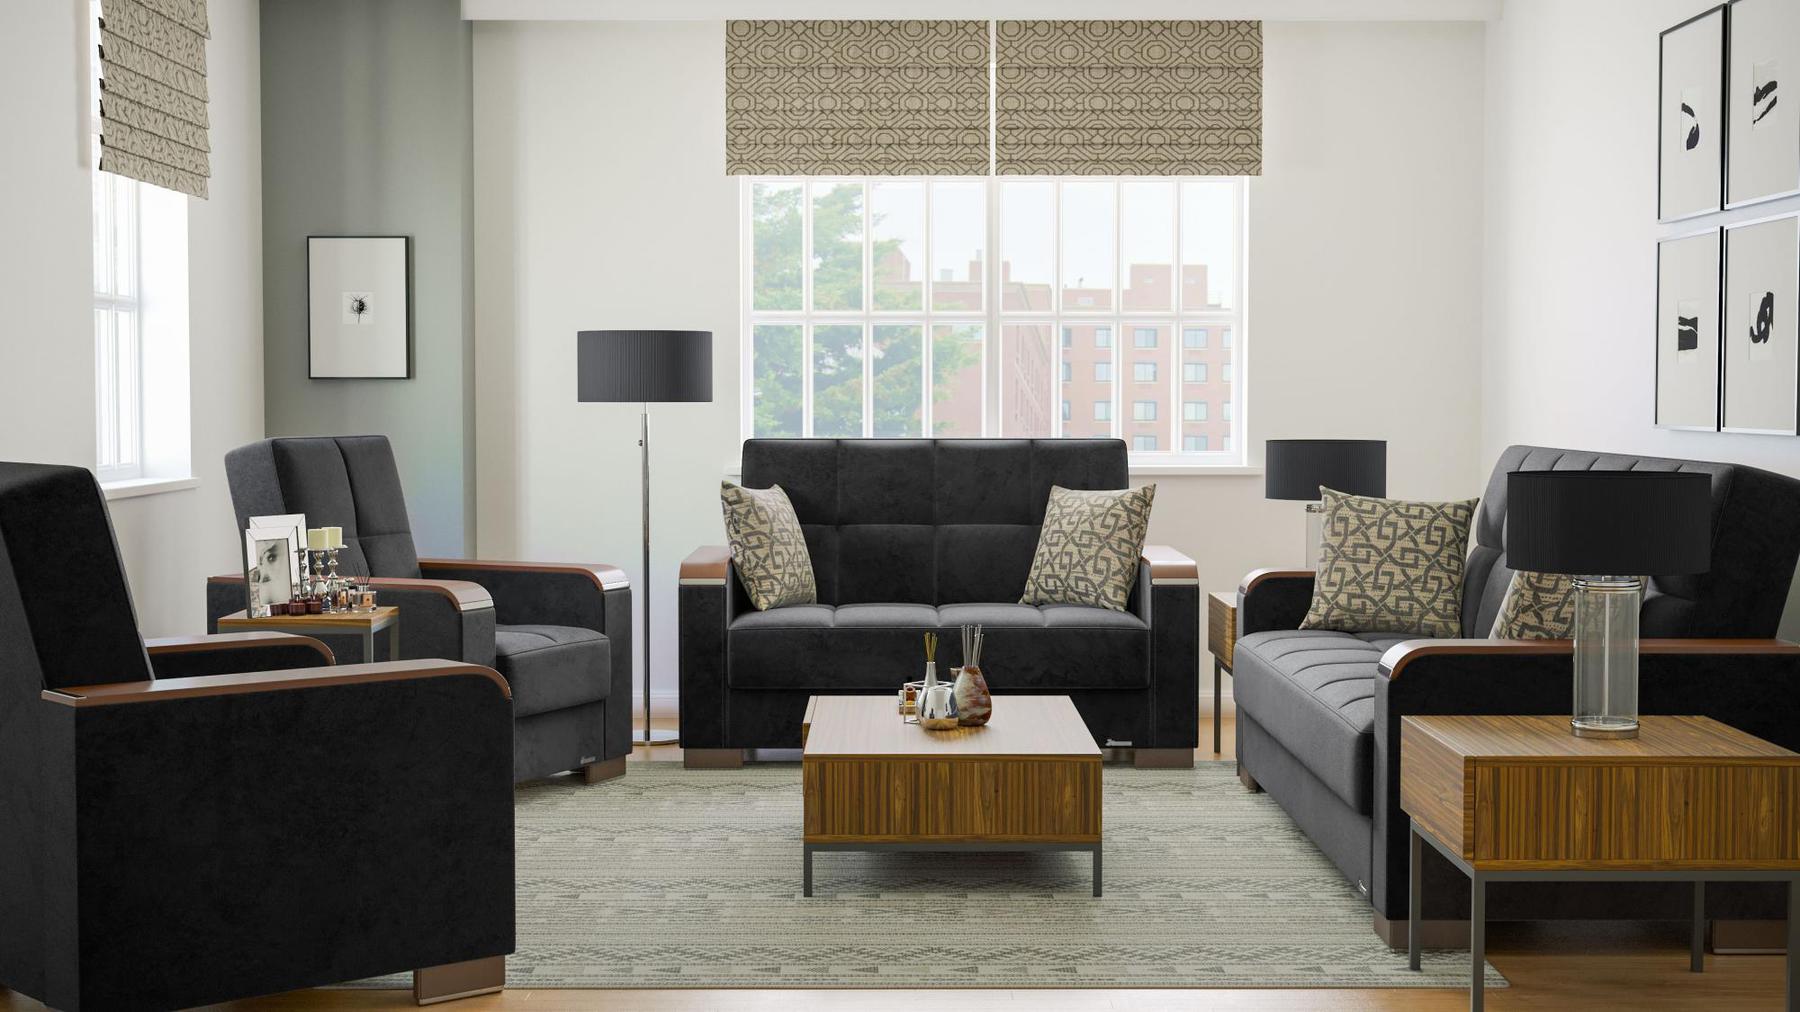 Modern design, Black , Microfiber upholstered convertible sleeper Loveseat with underseat storage from Voyage Luxe by Ottomanson in living room lifestyle setting with the matching furniture set. This Loveseat measures 67 inches width by 36 inches depth by 41 inches height.